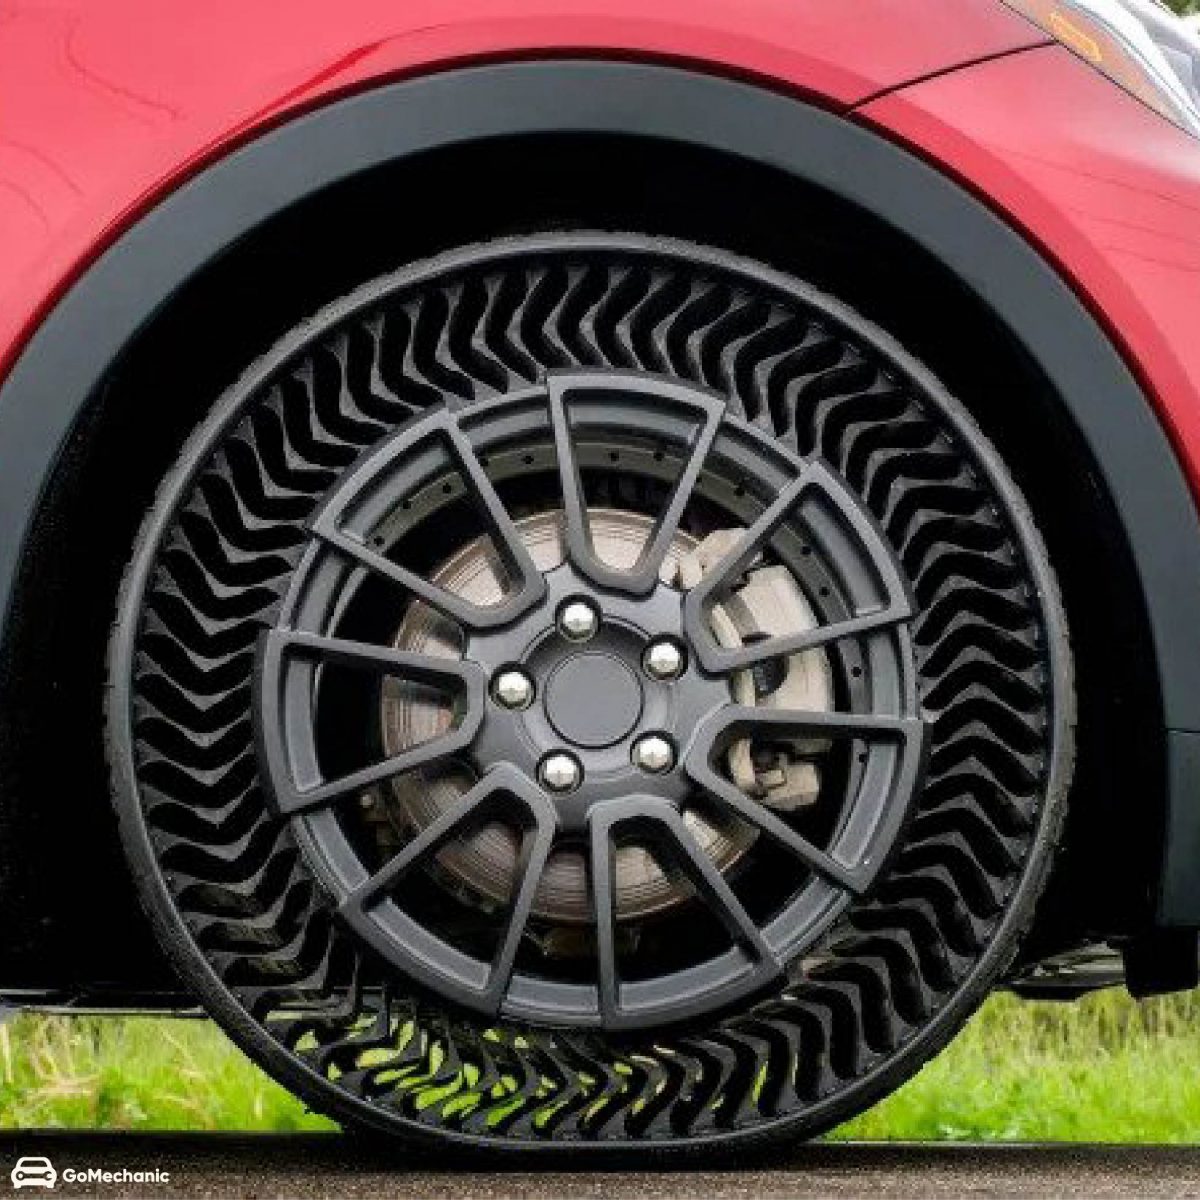 Michelin’s Puncture Proof Tyres | The Future Is Here!